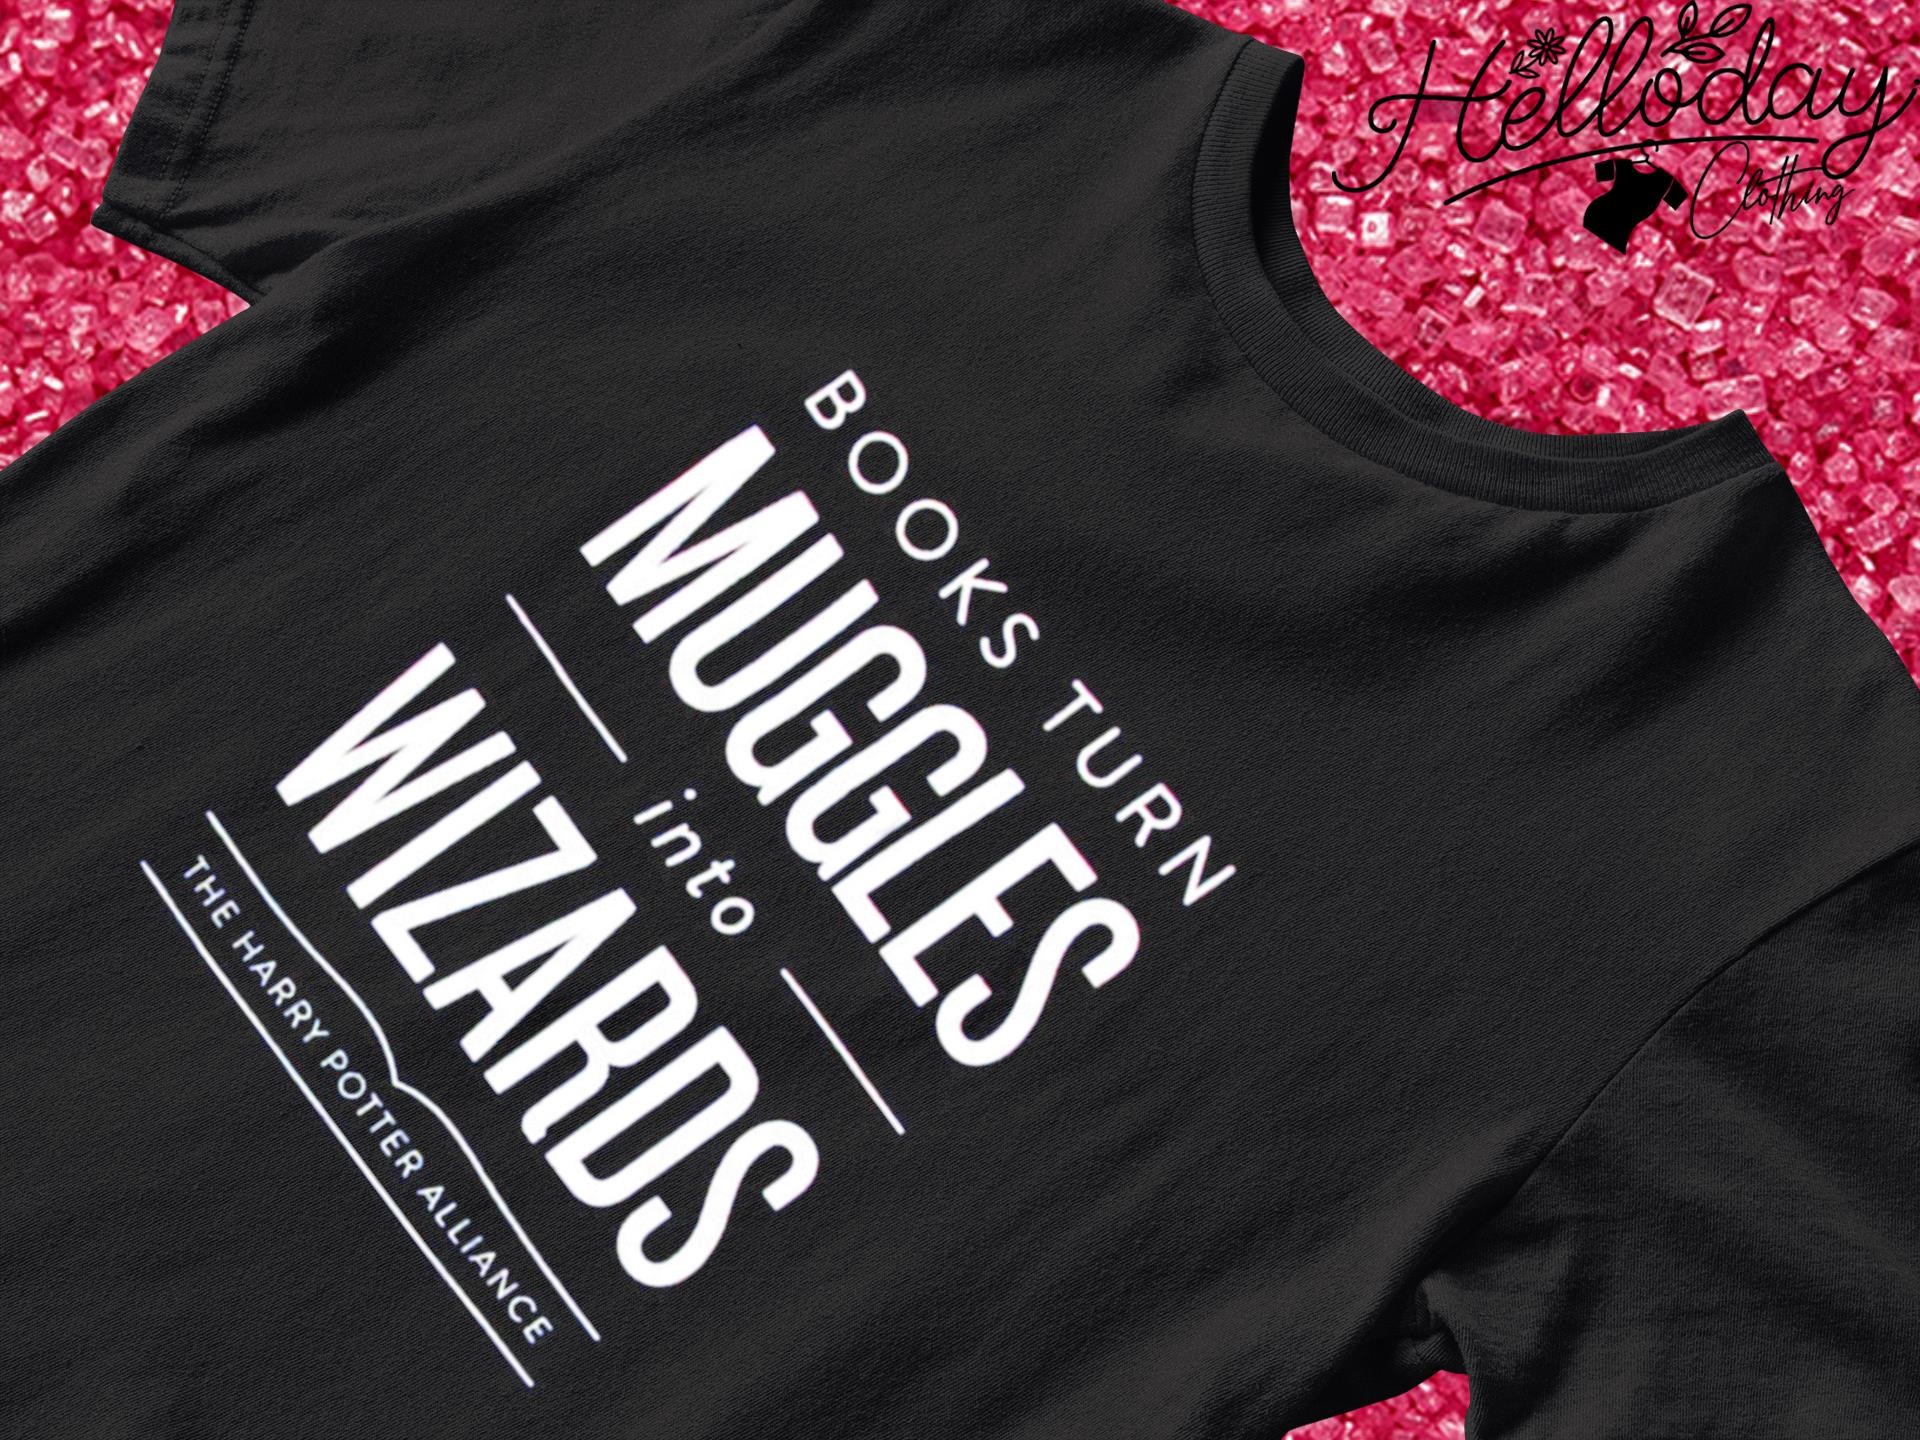 Books Turn Muggles into Wizards shirt